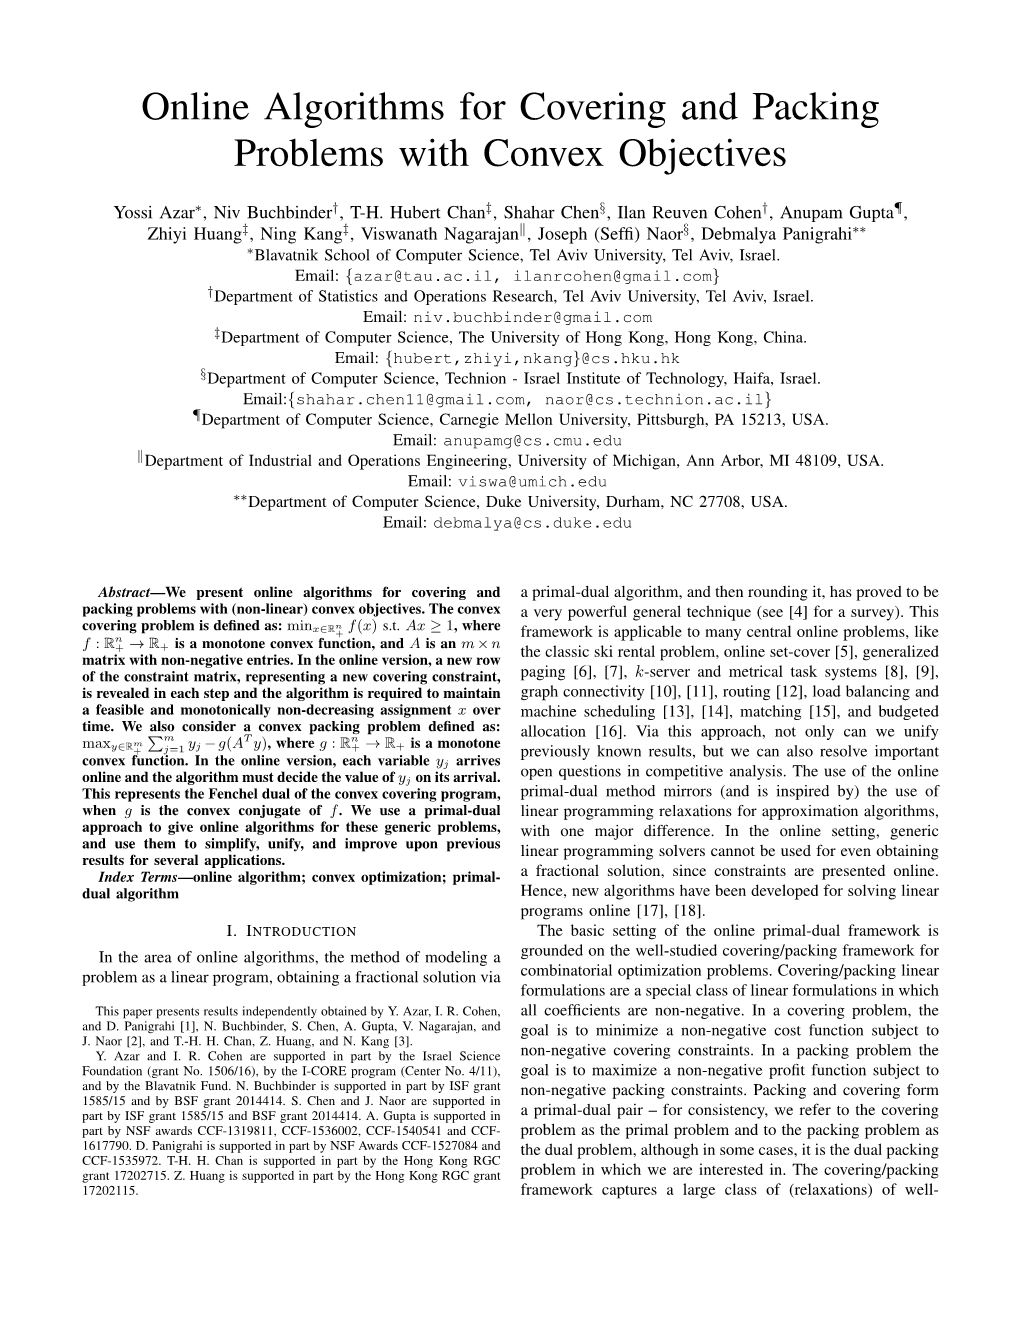 Online Algorithms for Covering and Packing Problems with Convex Objectives